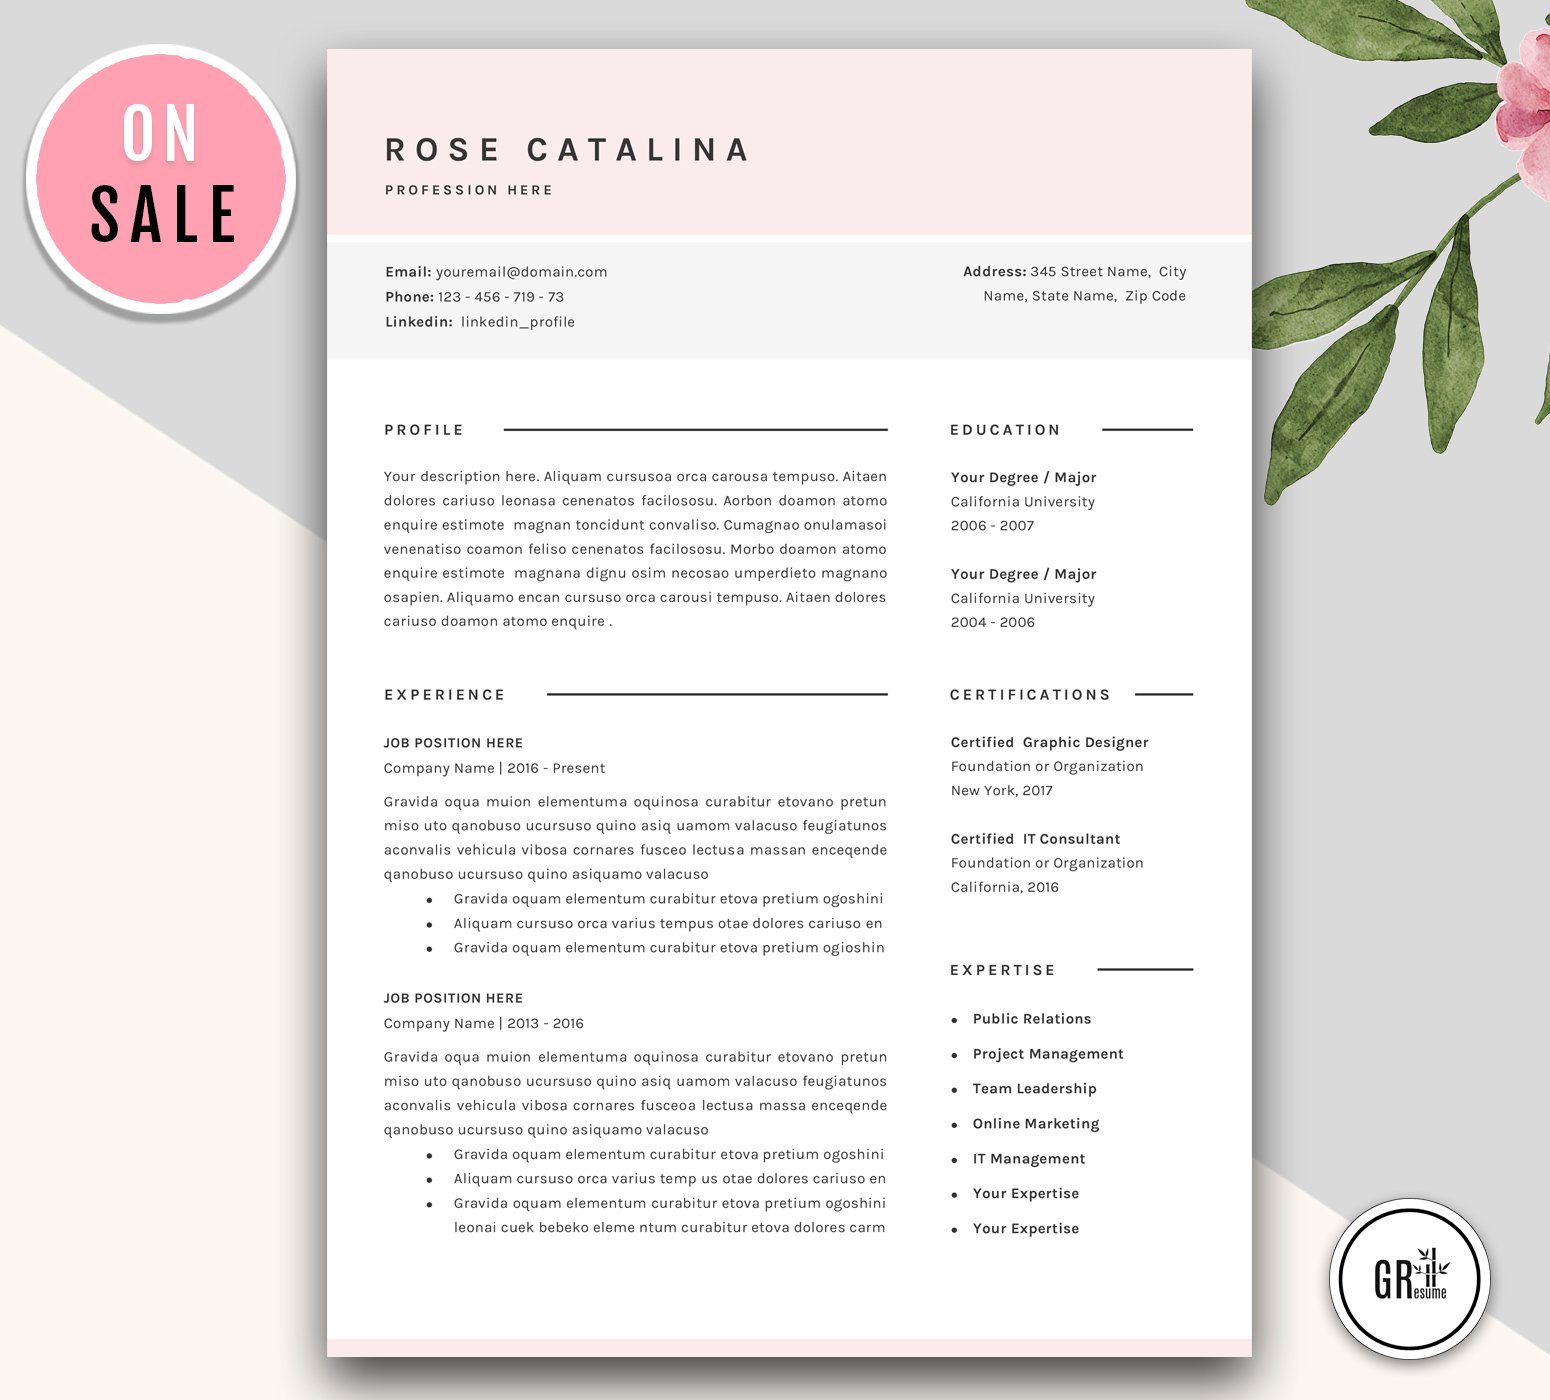 Professional Resume Template - Word cover image.